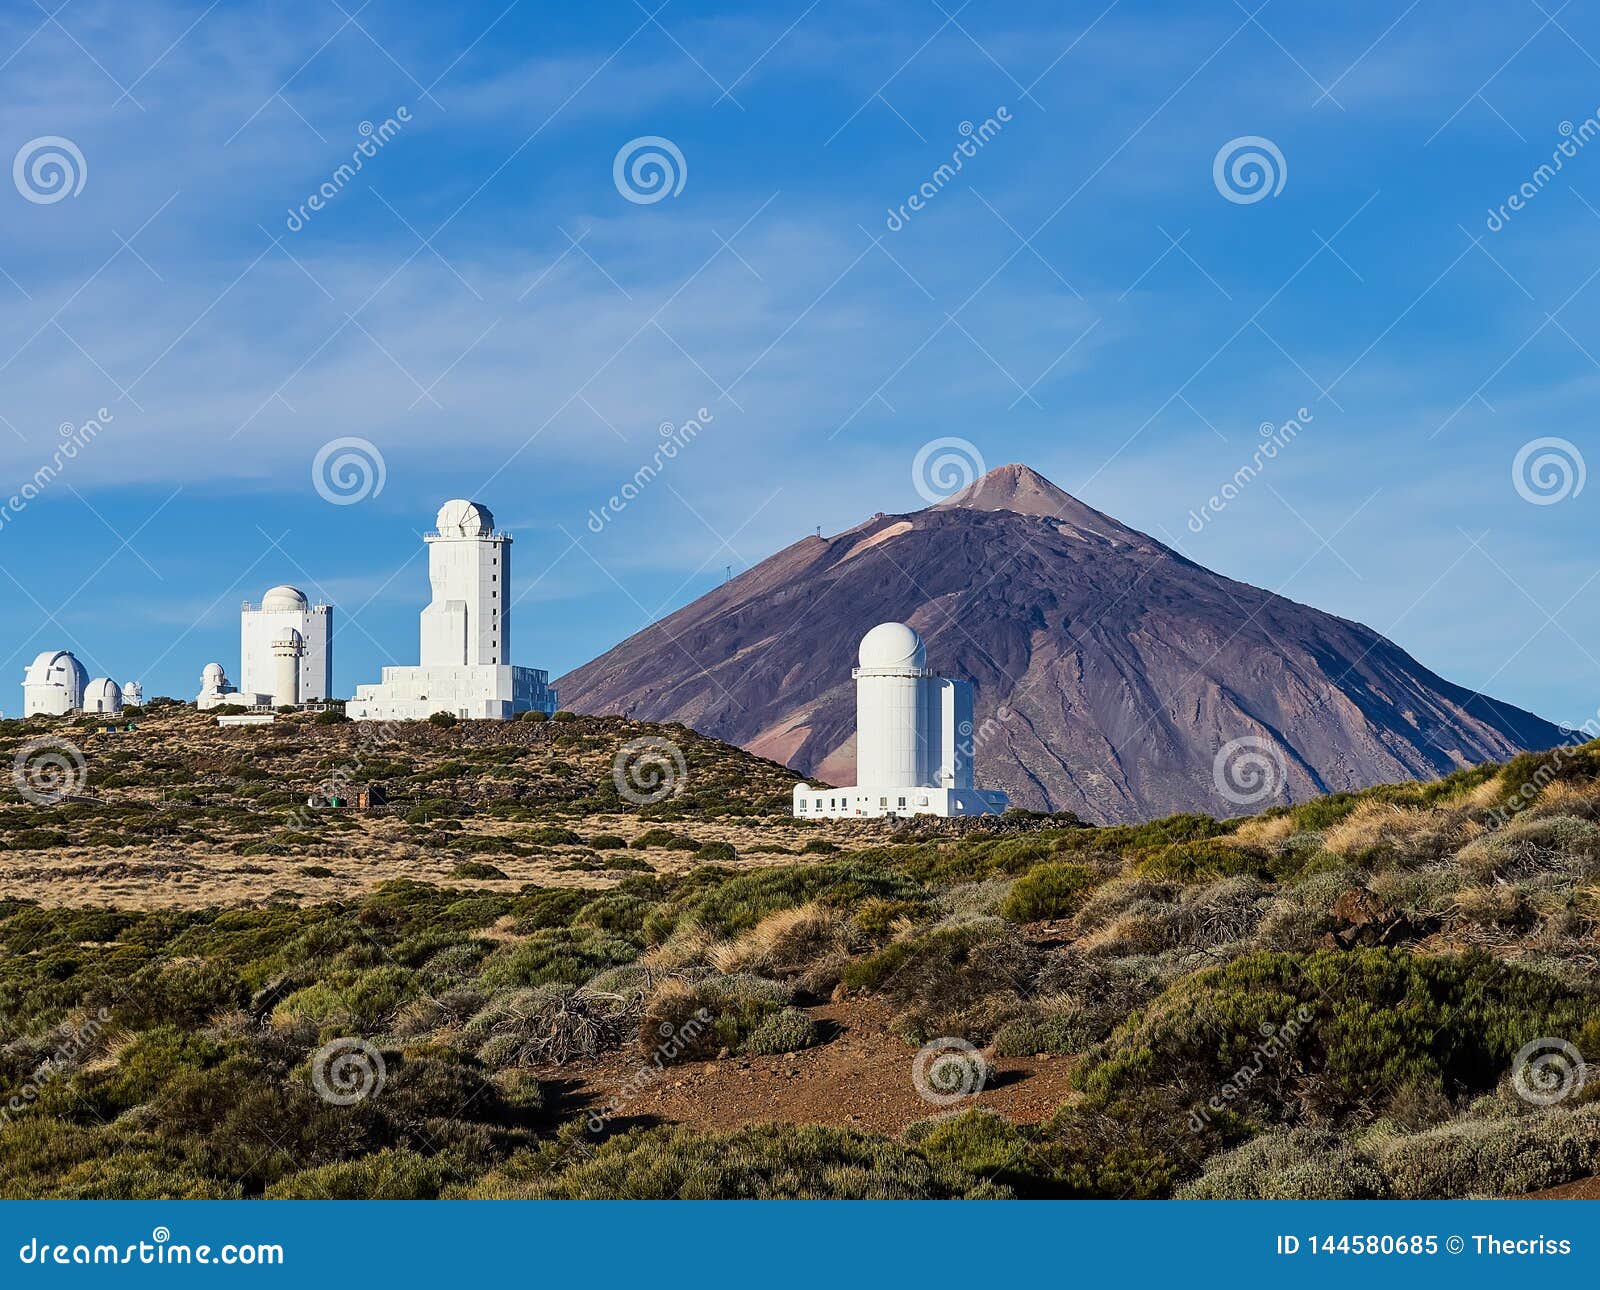 view of the observatory with mount teide to the rear observatorio del teide, tenerife, canary islands, spain